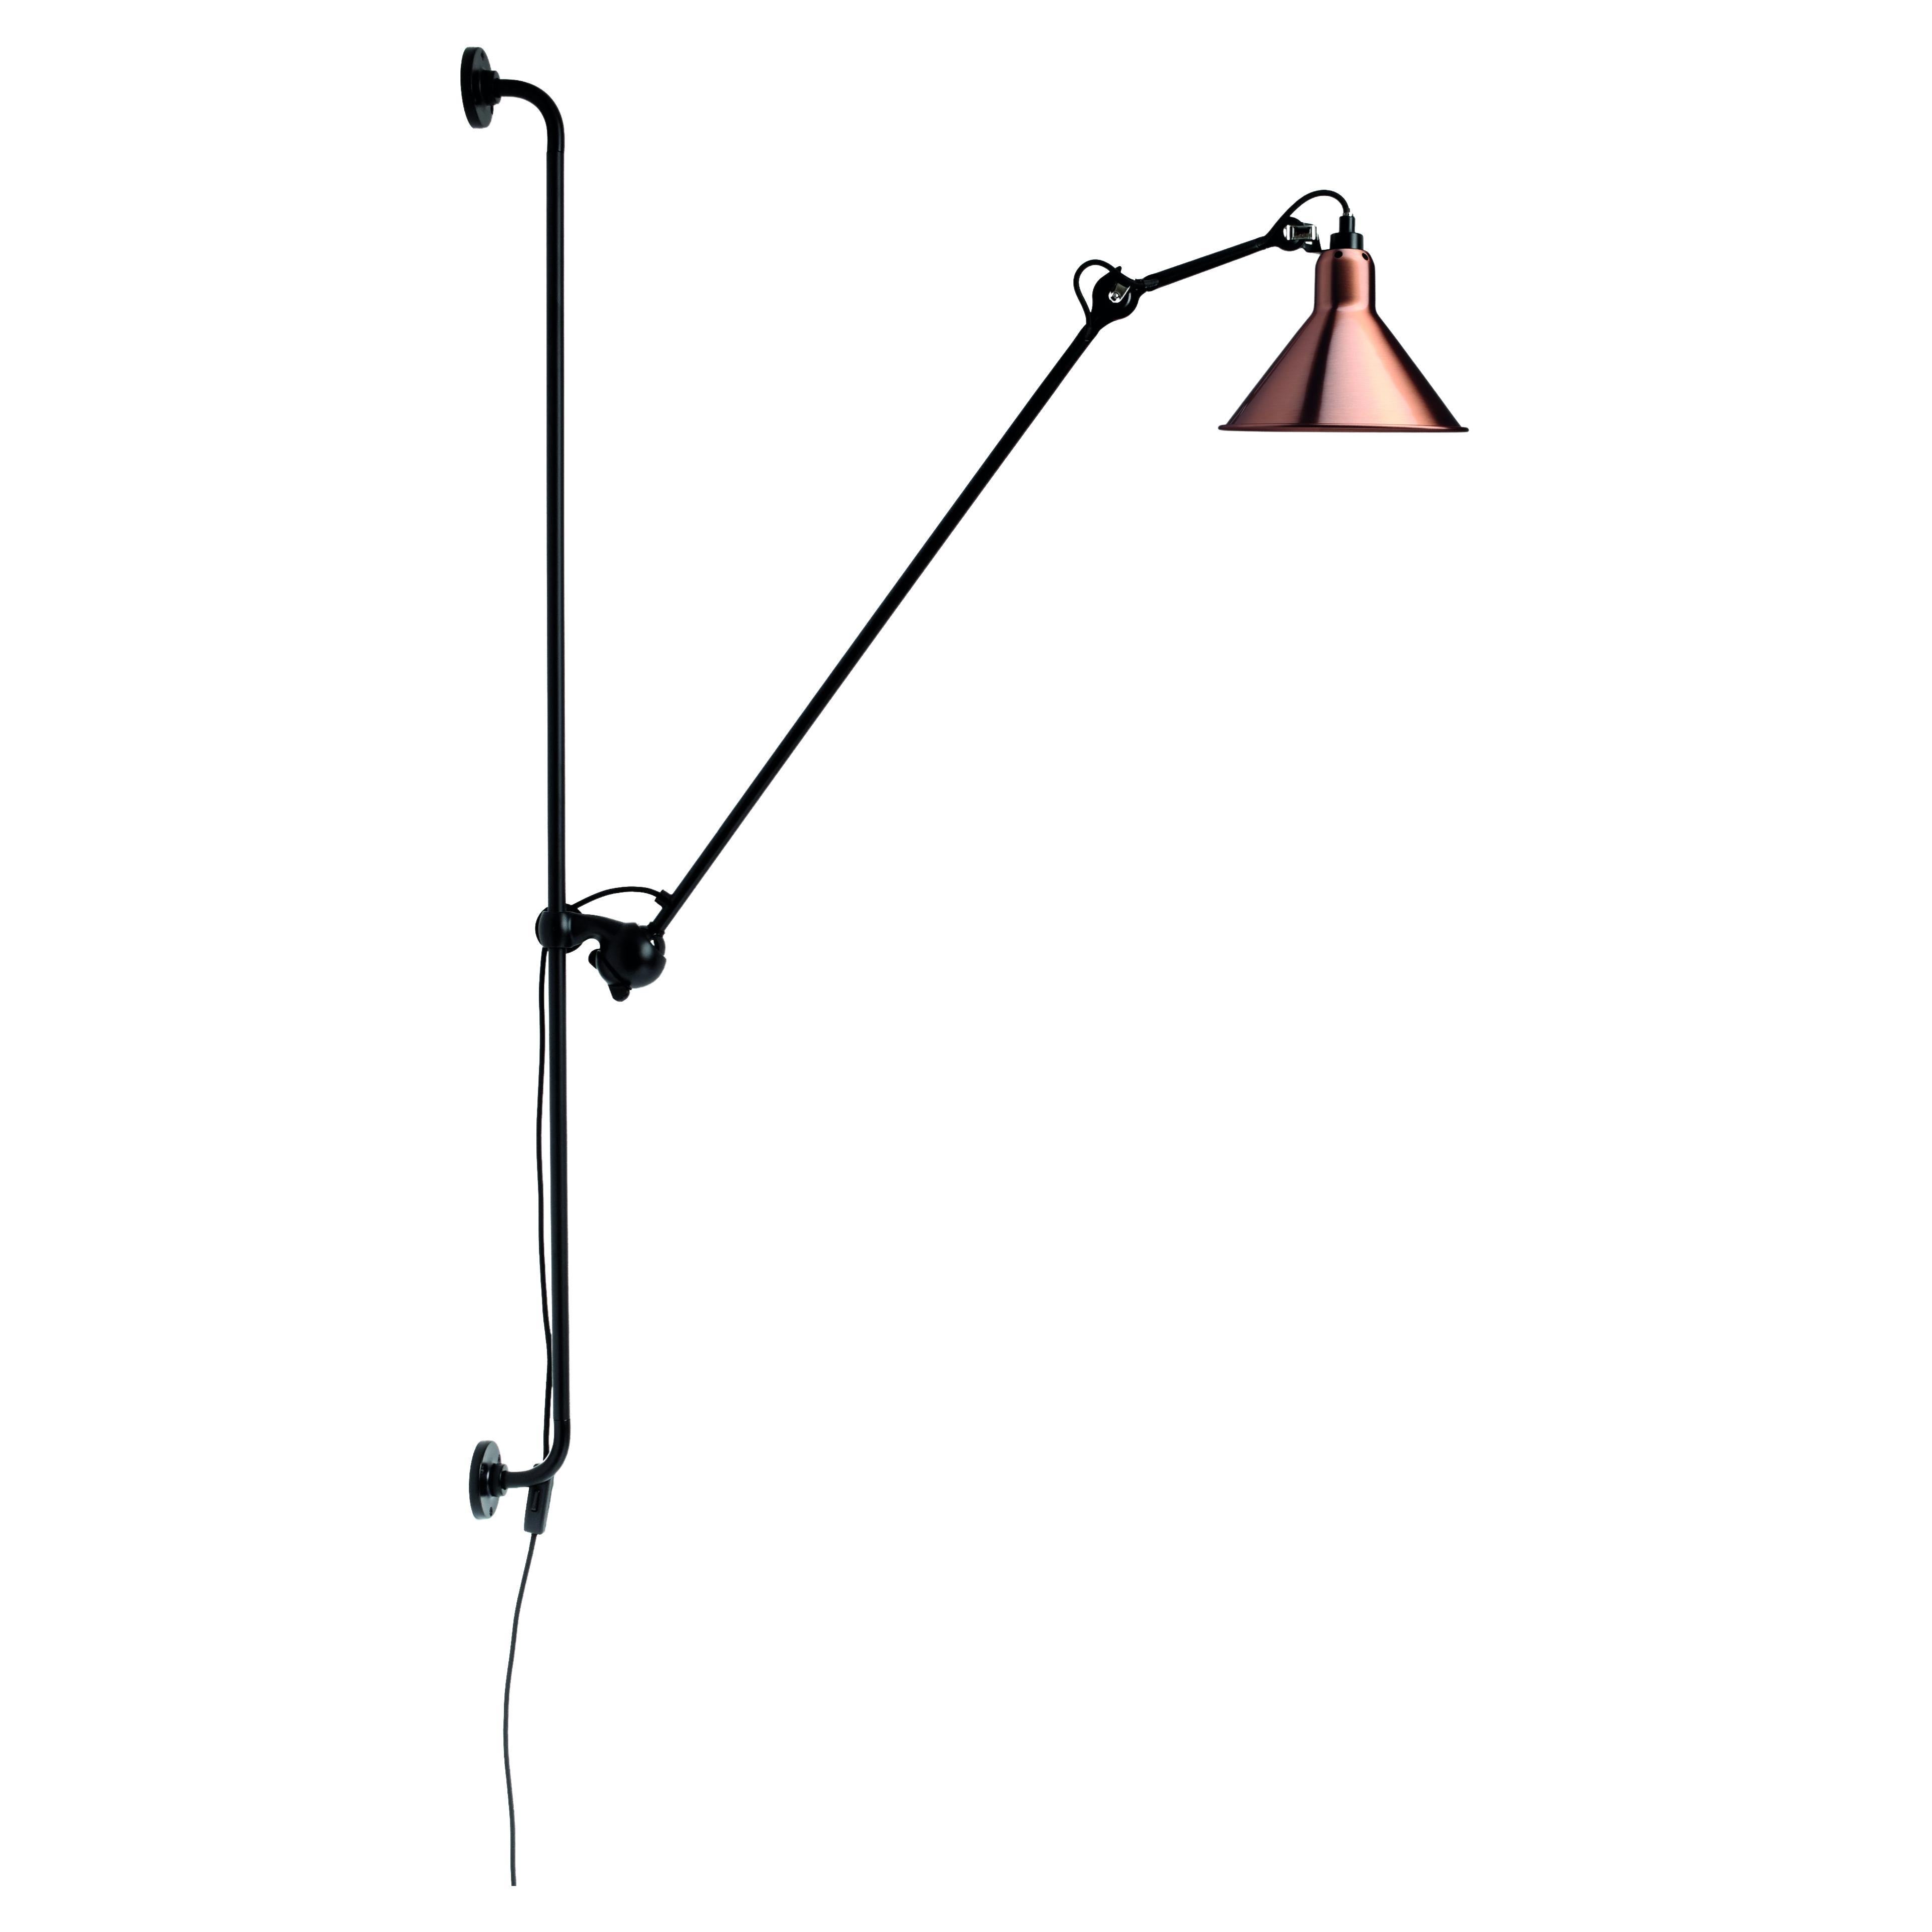 DCW Editions La Lampe Gras N°214 Conic Wall Lamp in Black Arm and Copper Shade For Sale